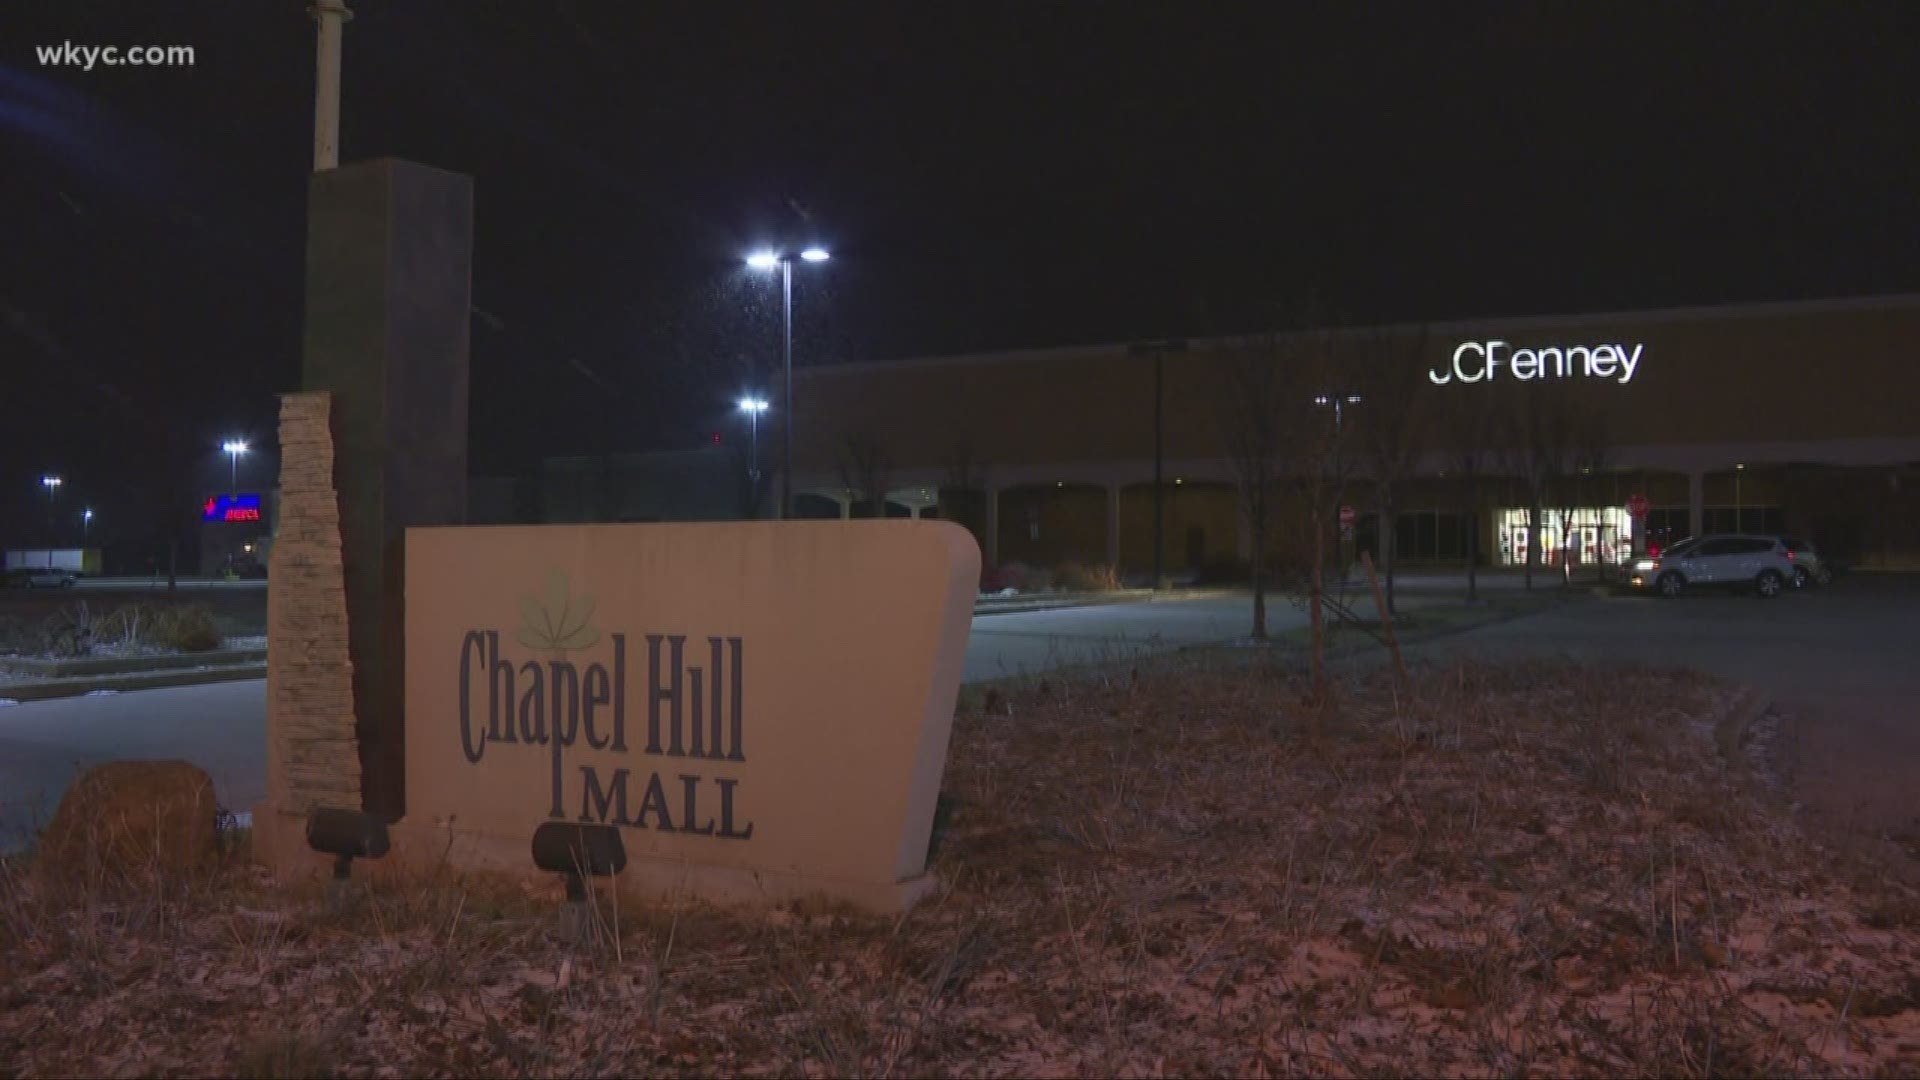 Chapel Hill Mall will soon be losing its last anchor store. In an email to 3News, JCPenney confirms that it will be closing its doors this spring.